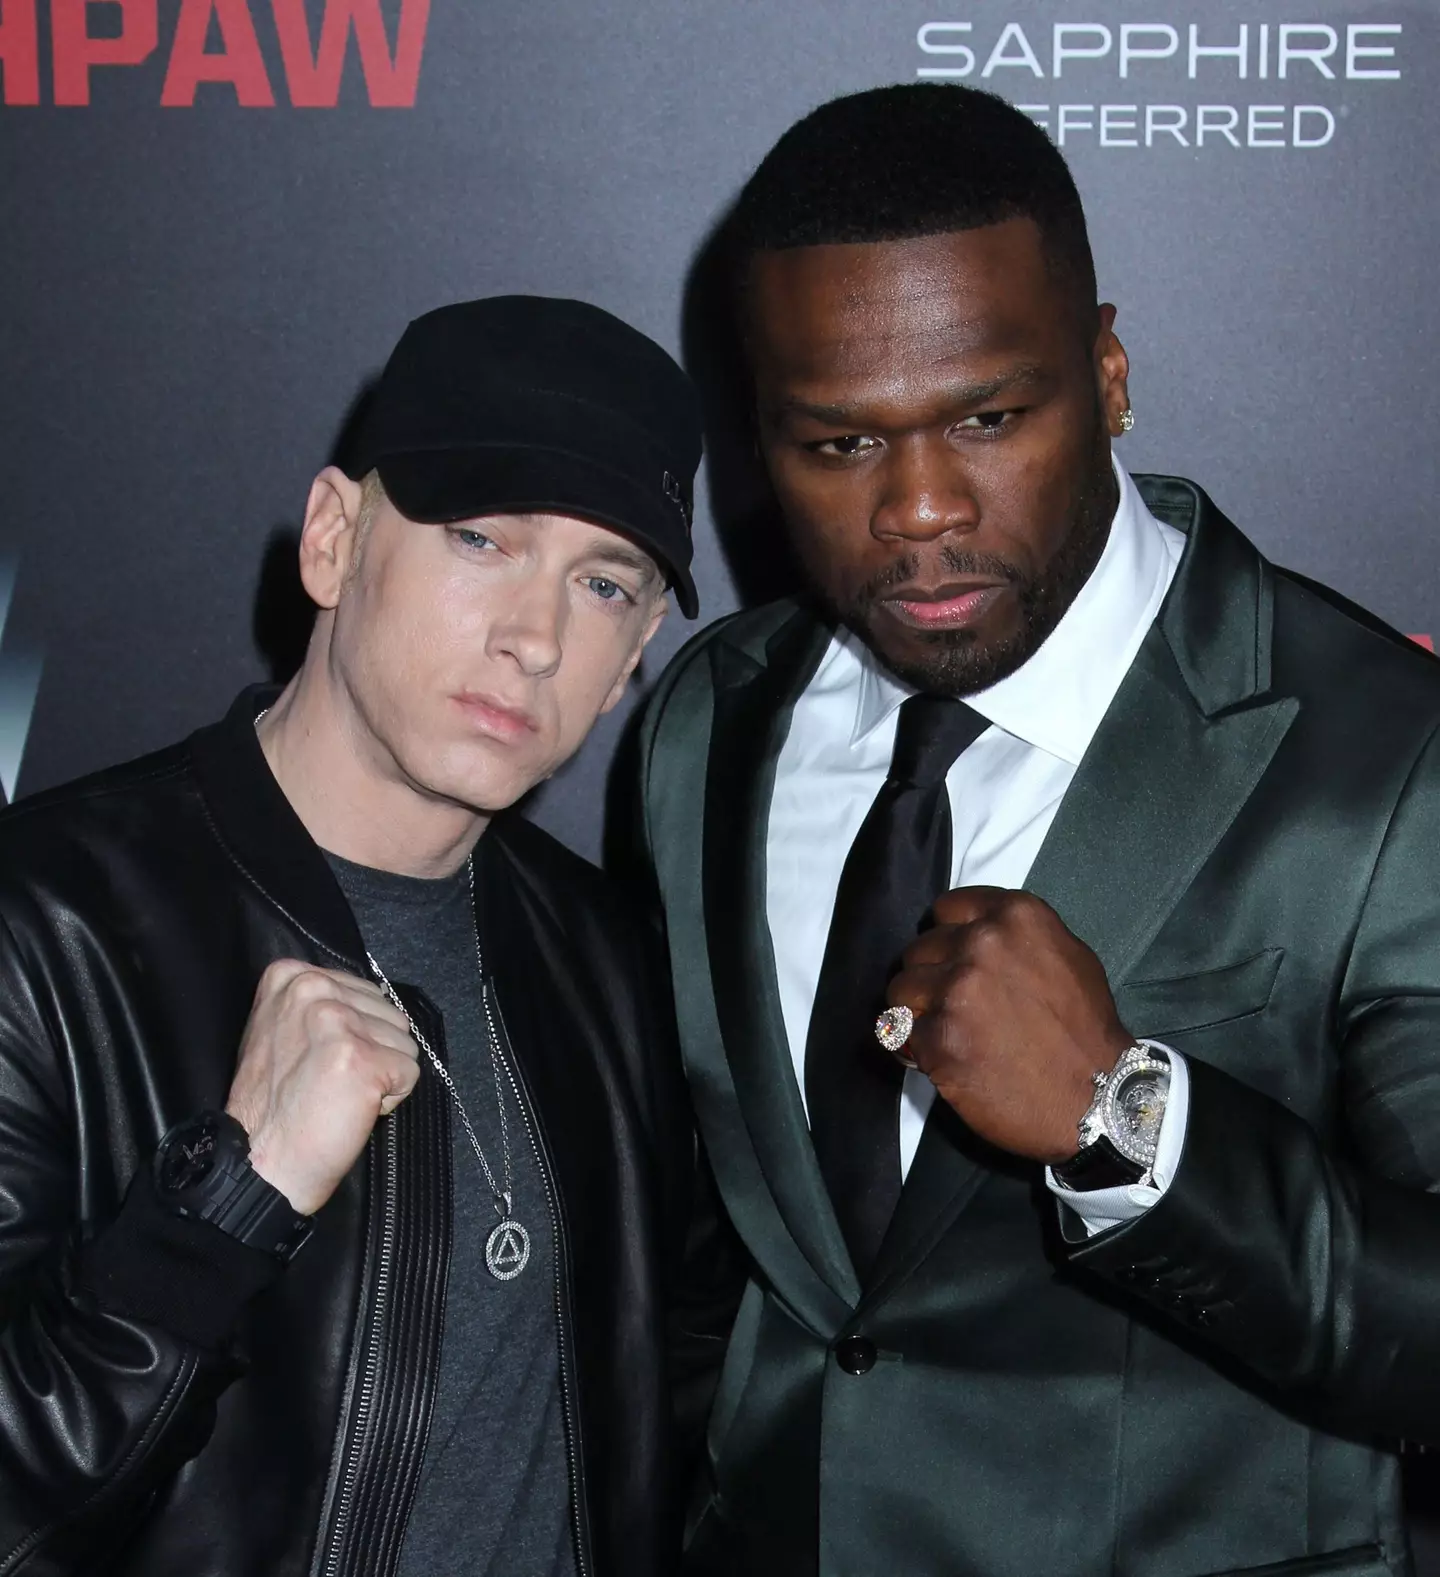 50 Cent praised Eminem in a recent podcast interview.